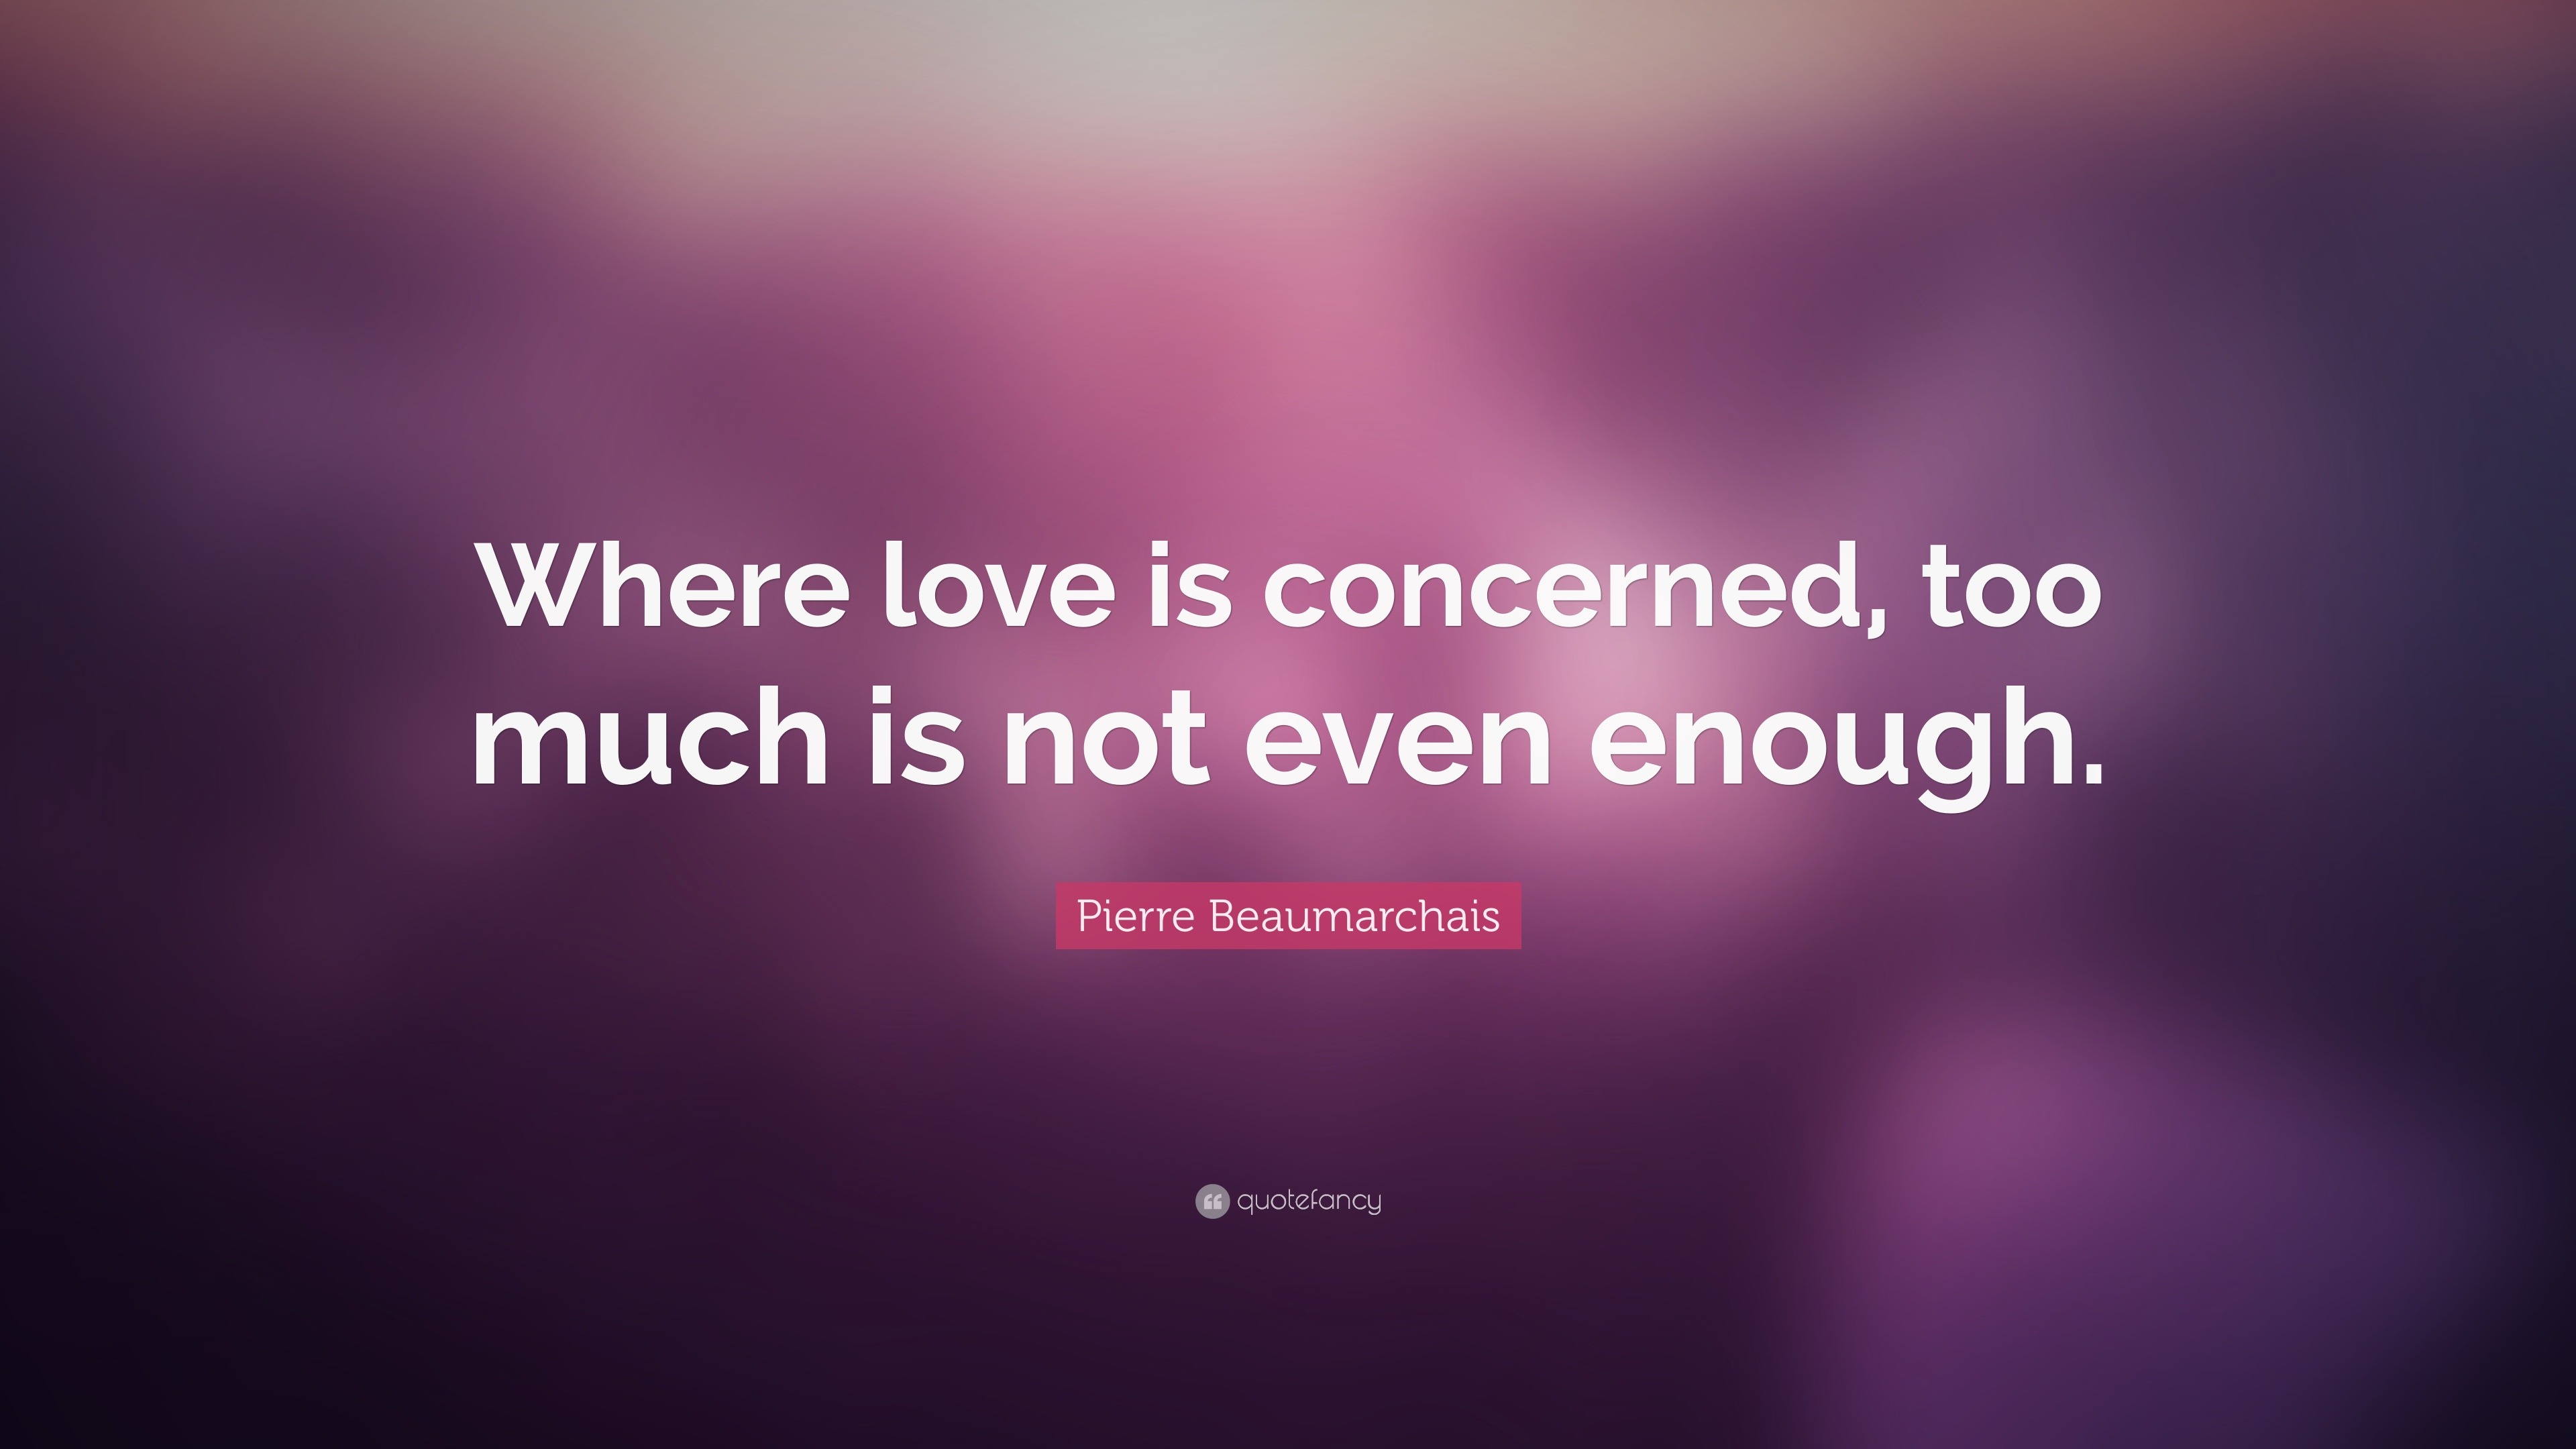 Pierre Beaumarchais Quote “Where love is concerned too much is not even enough